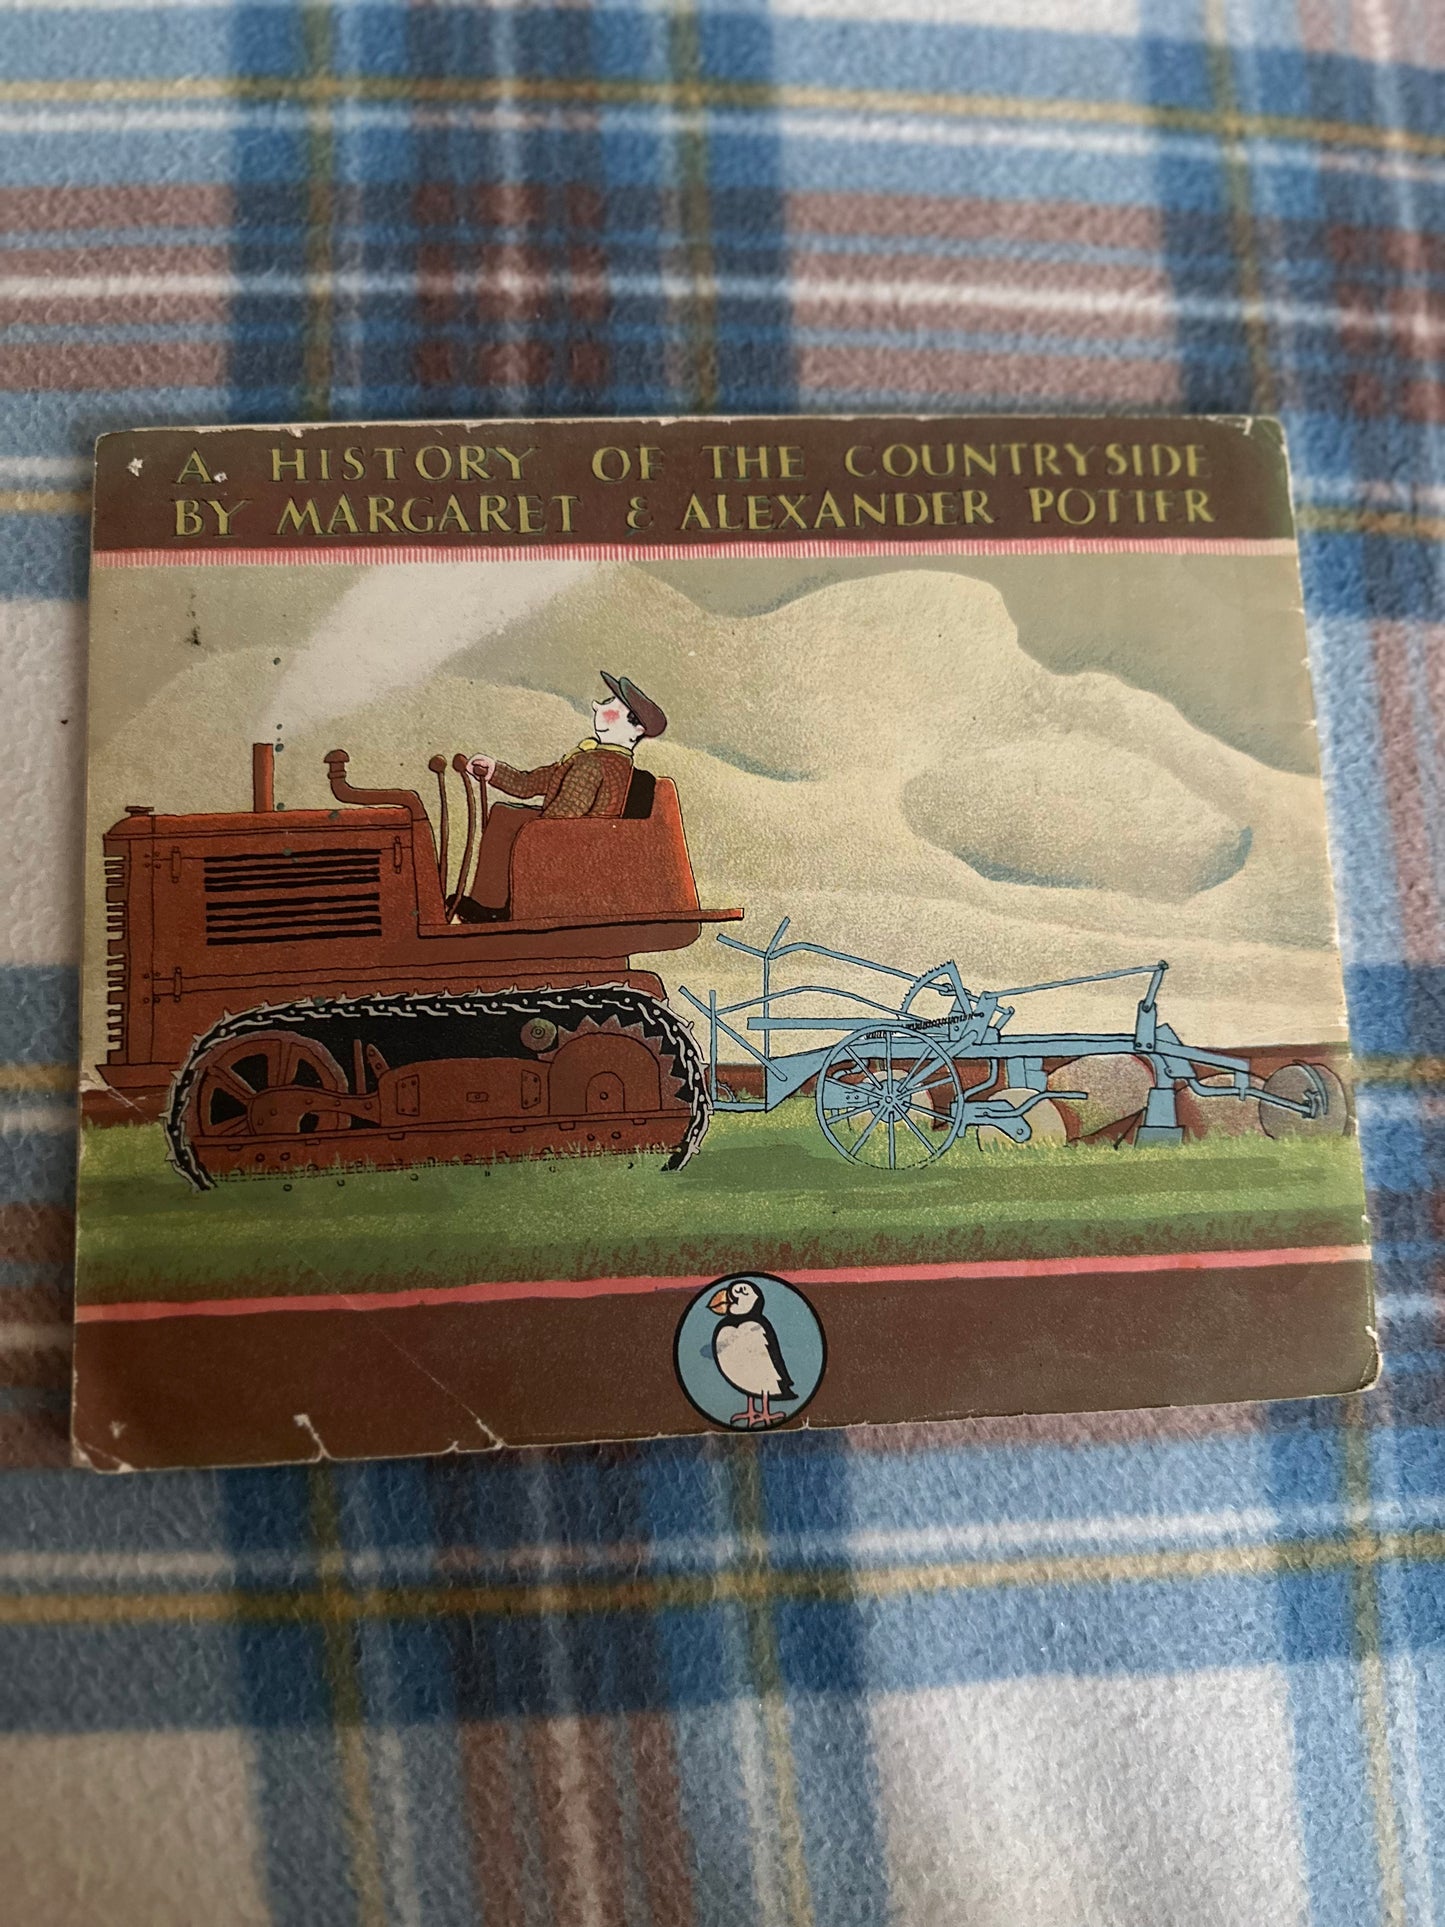 1944 History Of The Countryside - Margaret & Alexander Potter(PP37) Puffin Picture Book